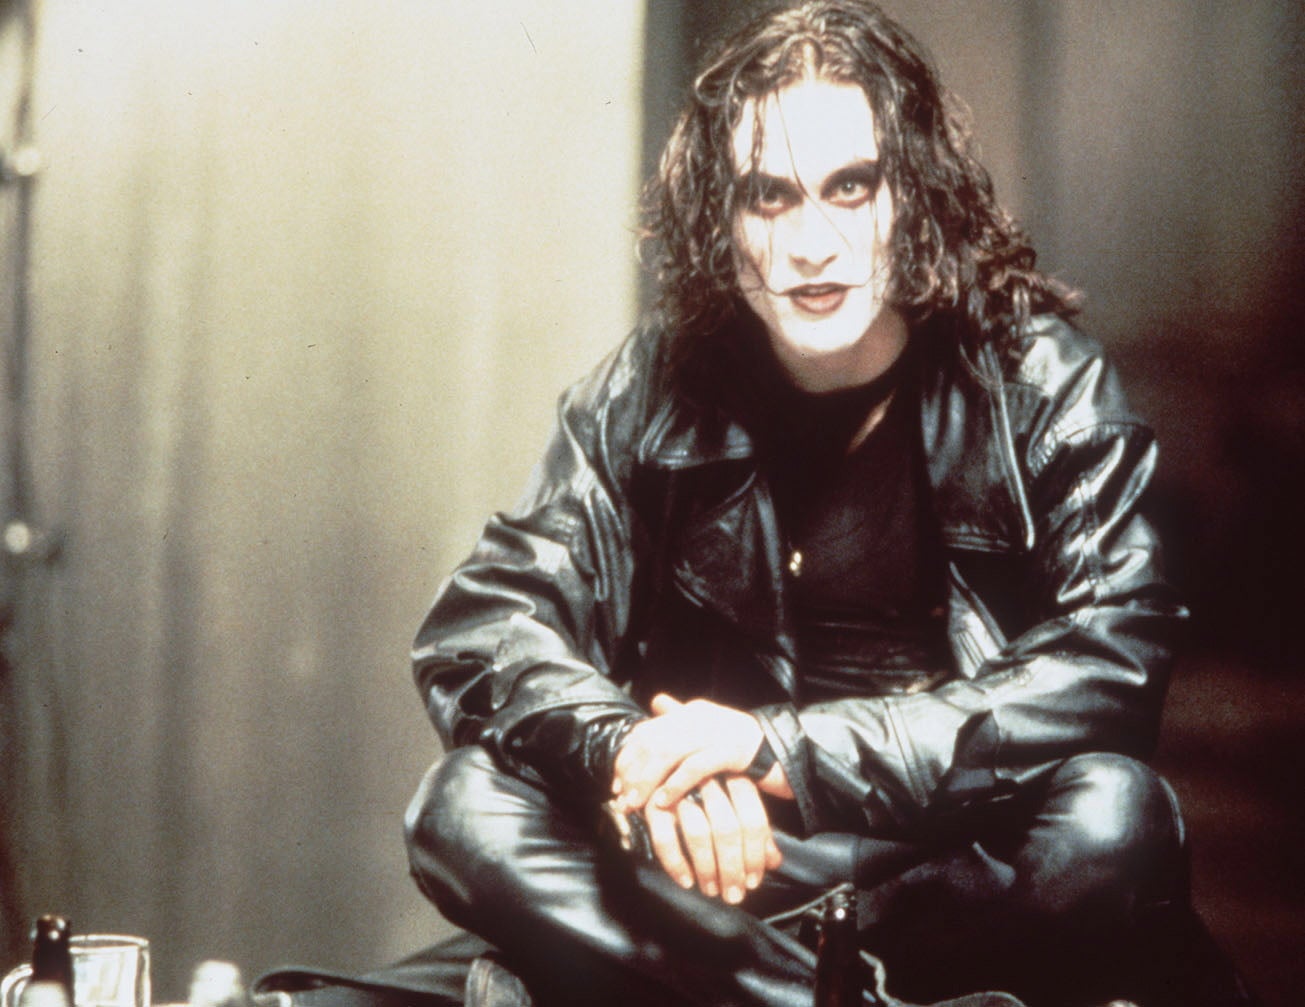 Brandon Lee died on the set of the movie in 1993